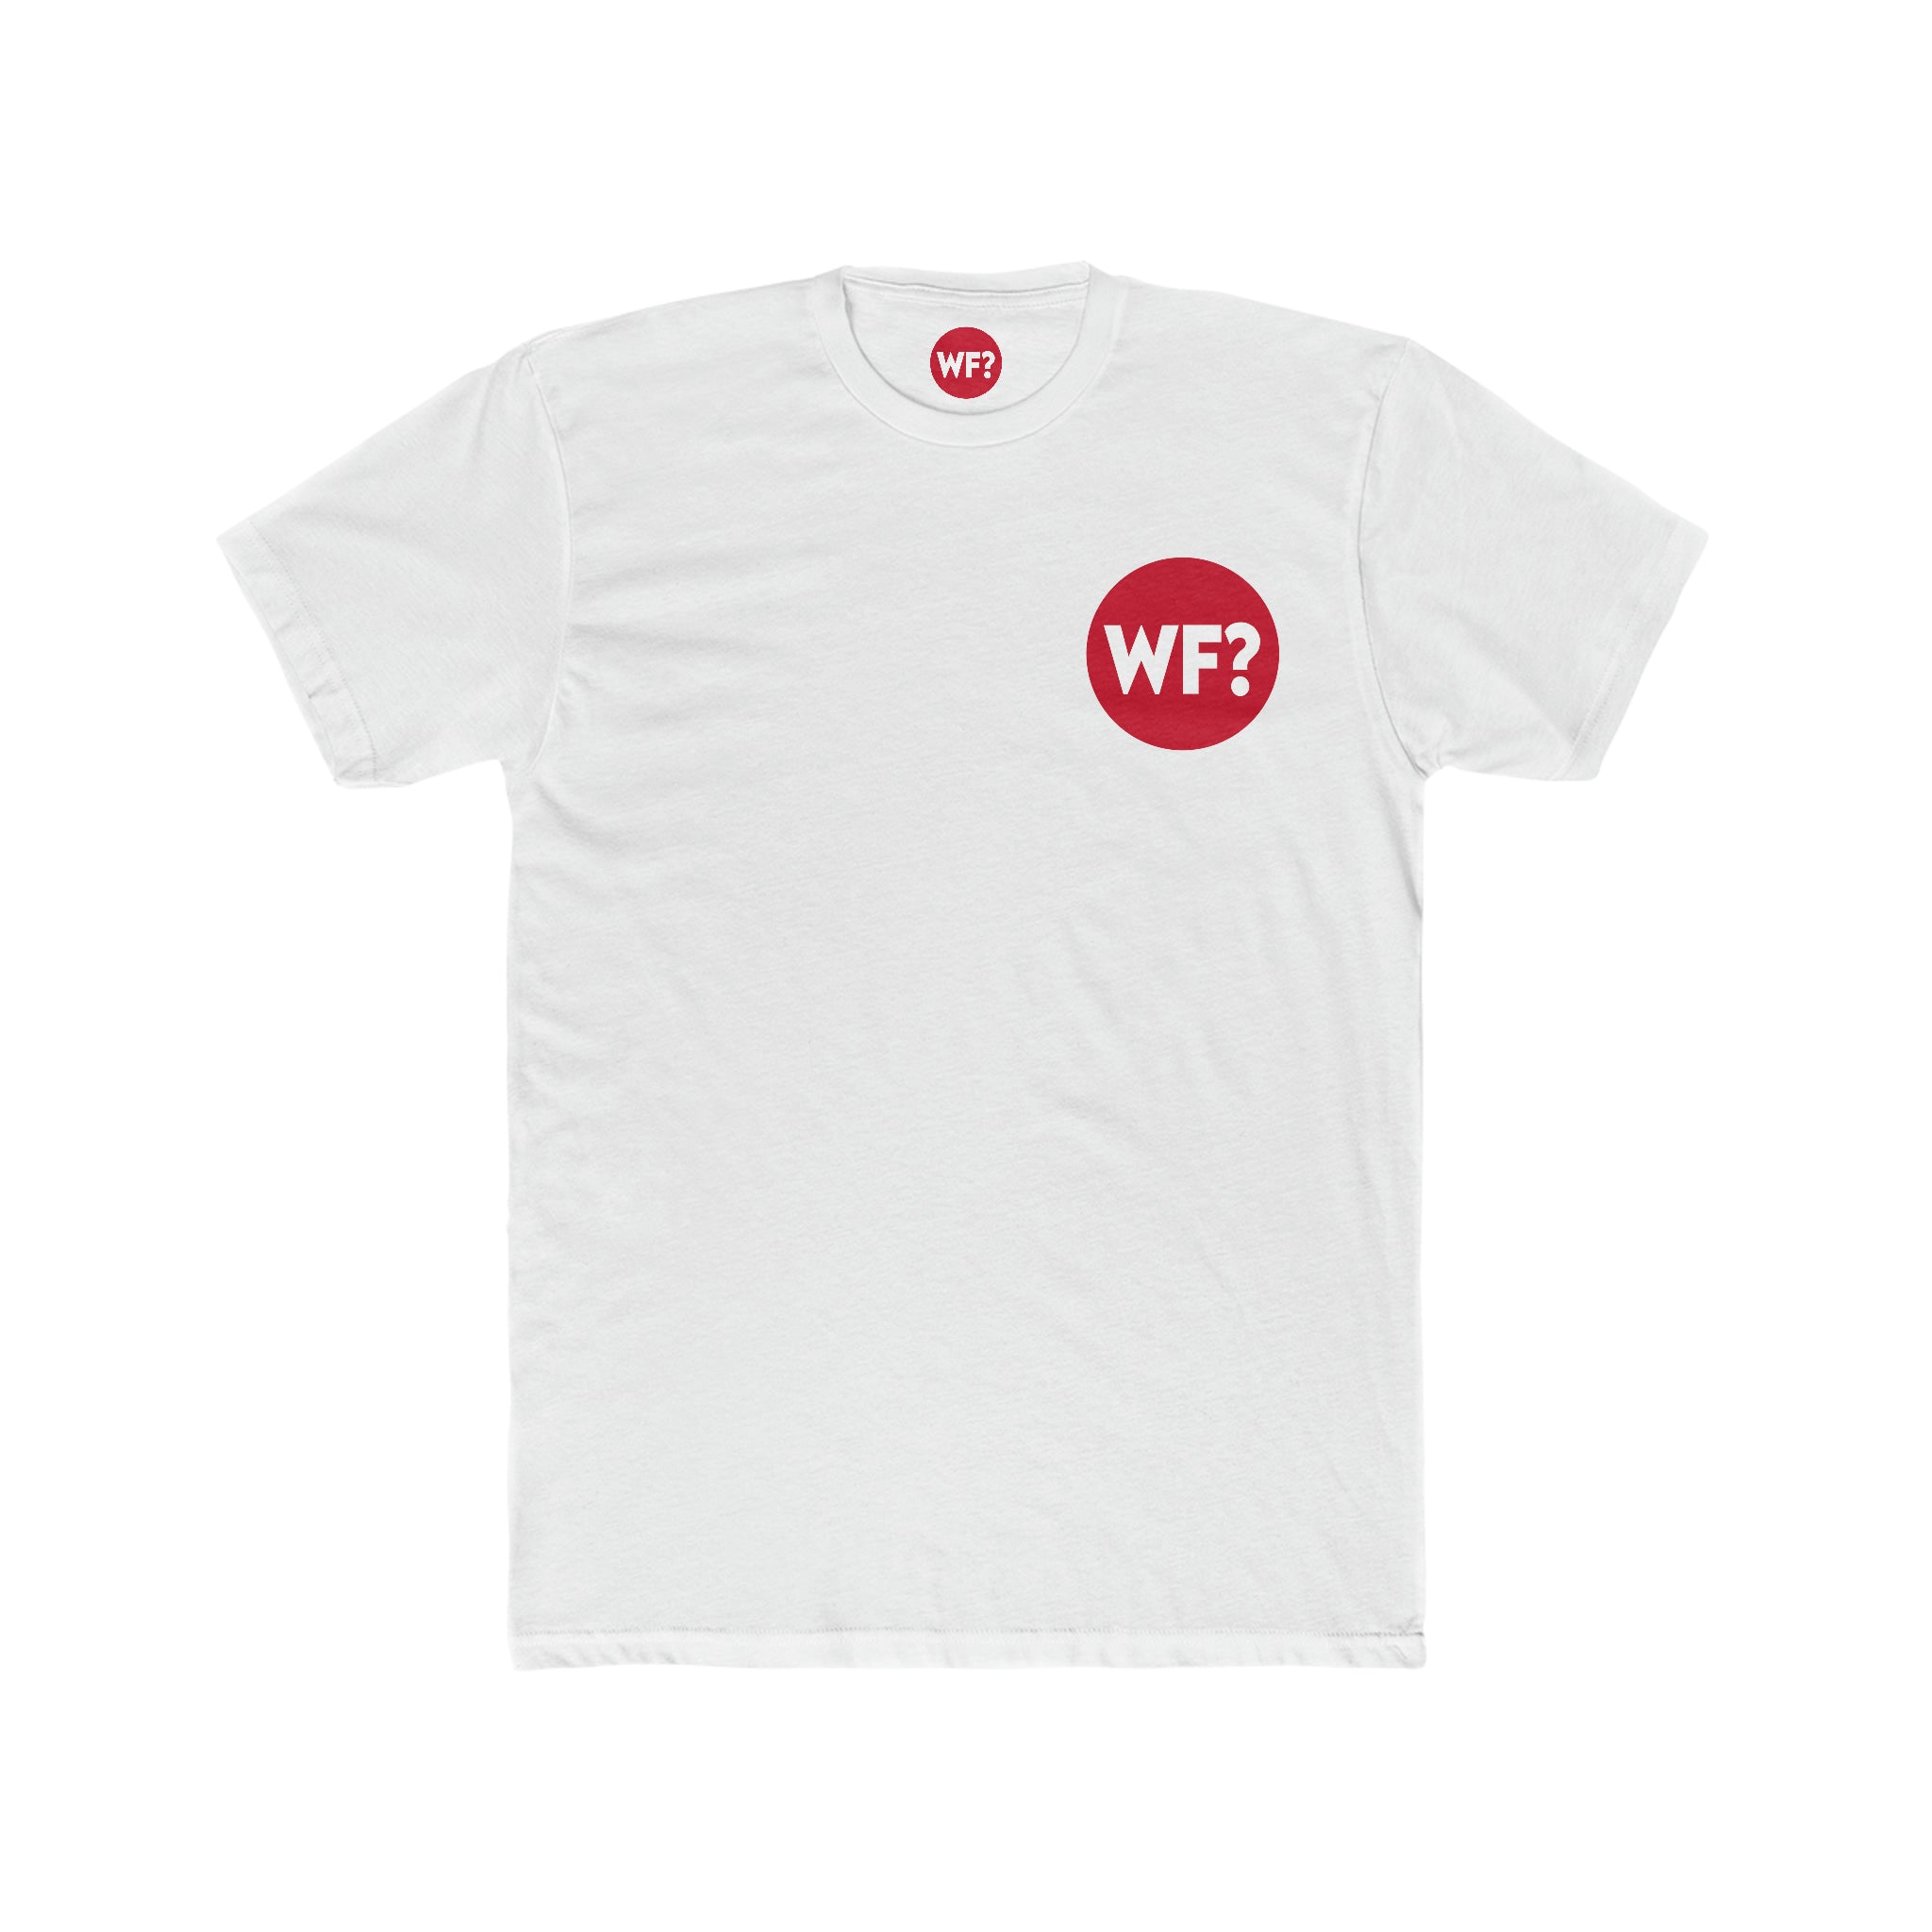 Buy solid-white Hecklefish on the Back Cotton Crew Tee